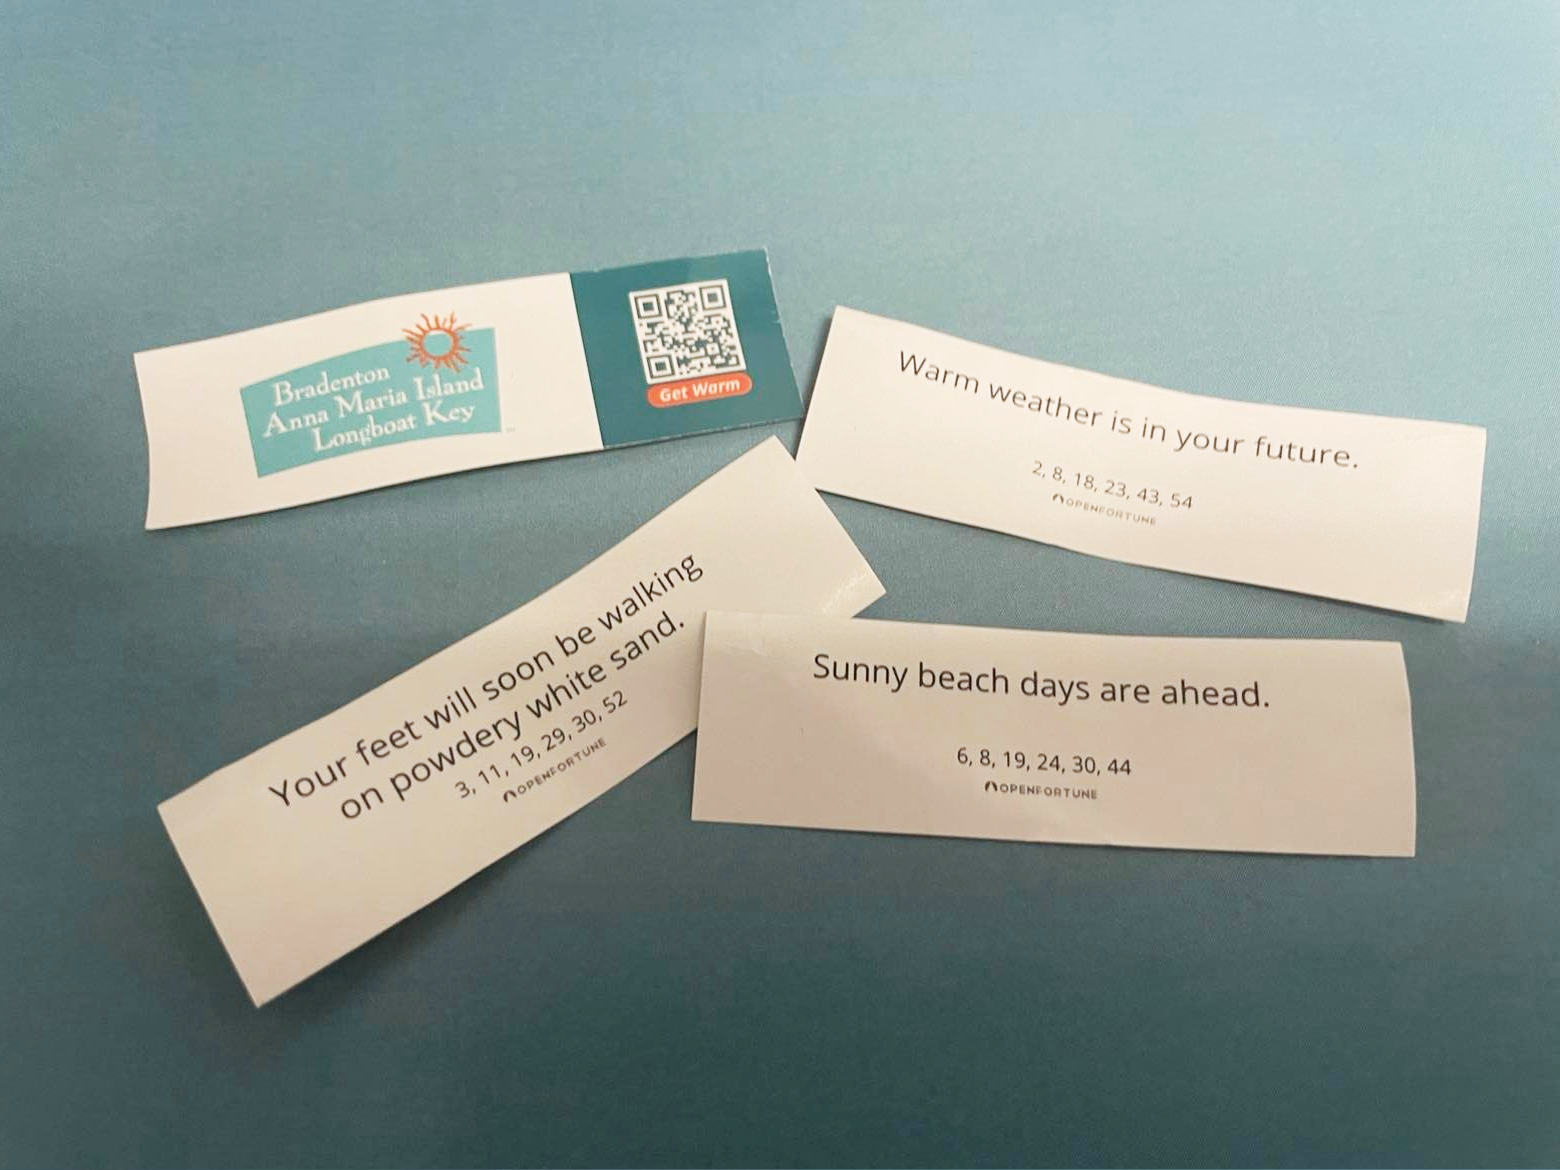 The tourist bureau staff members came up with more than 20 sayings of their own for their fortune cookie campaign.